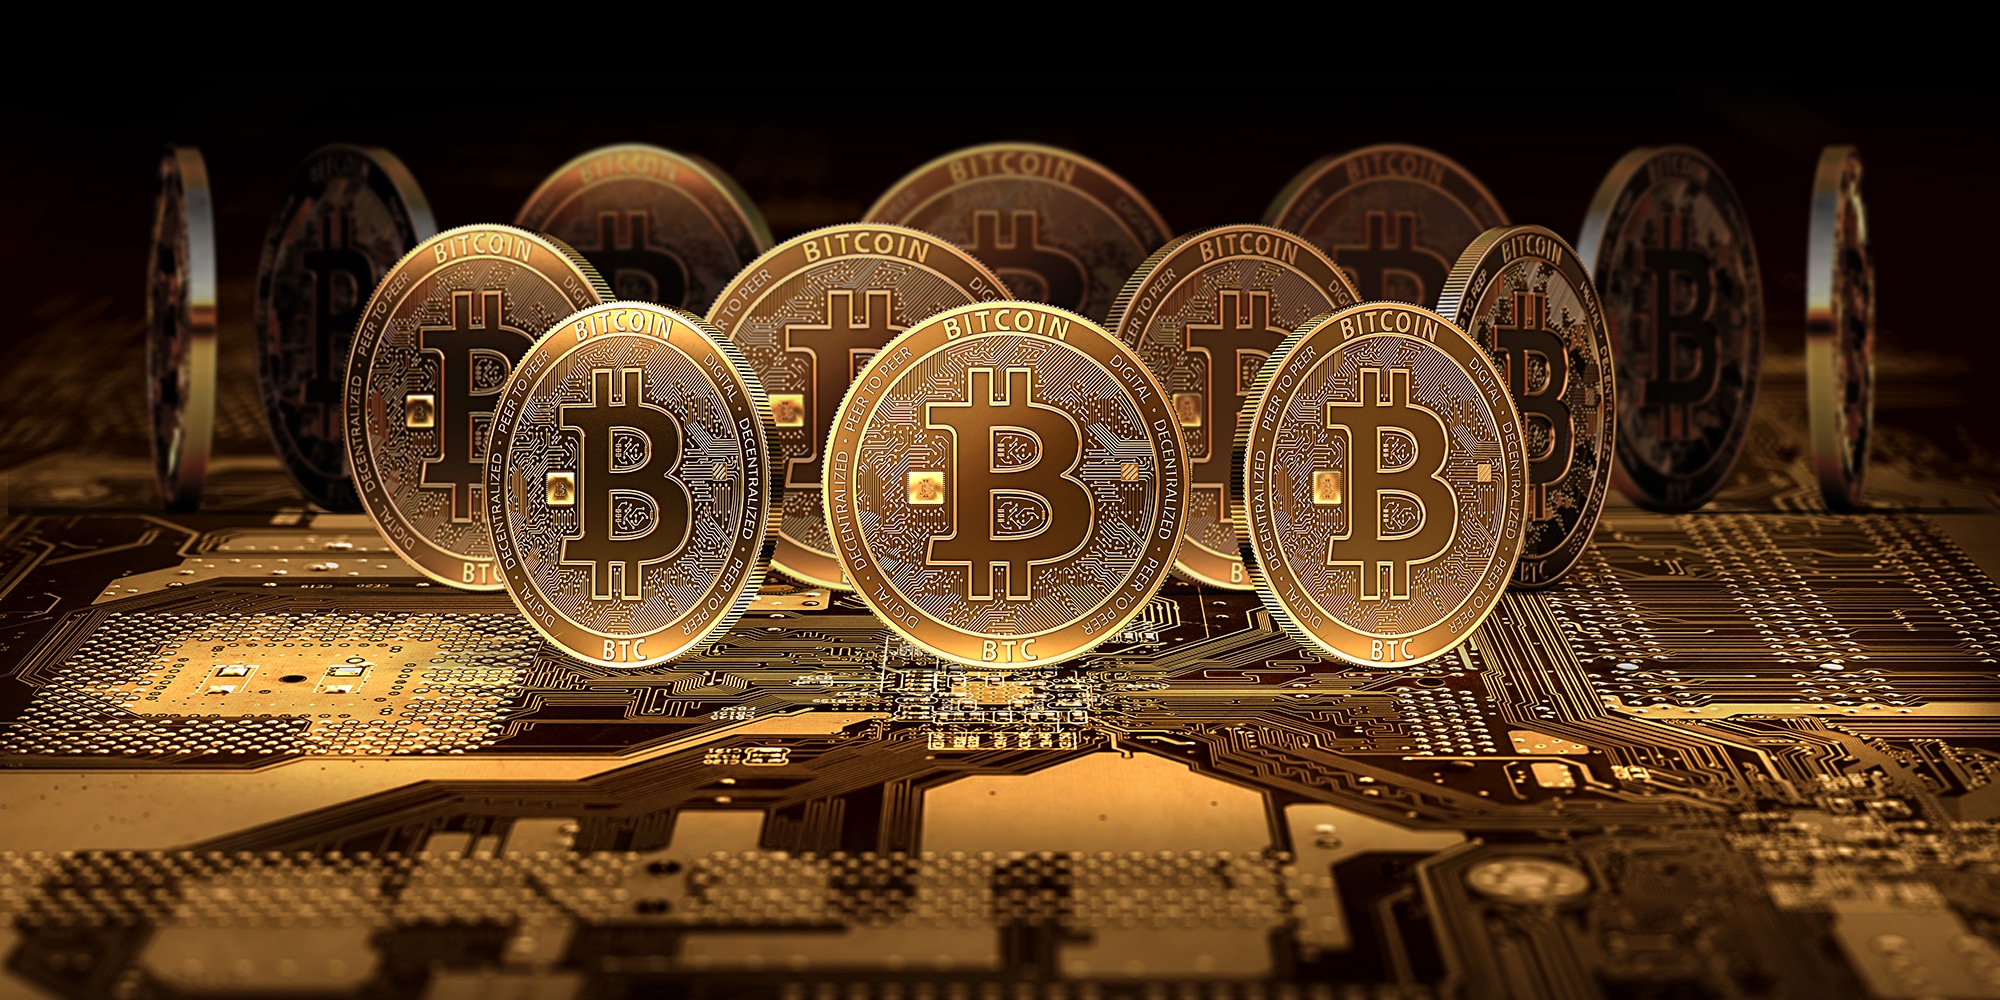 Let’s spend some bytes on bitcoin: a look at cryptocurrency